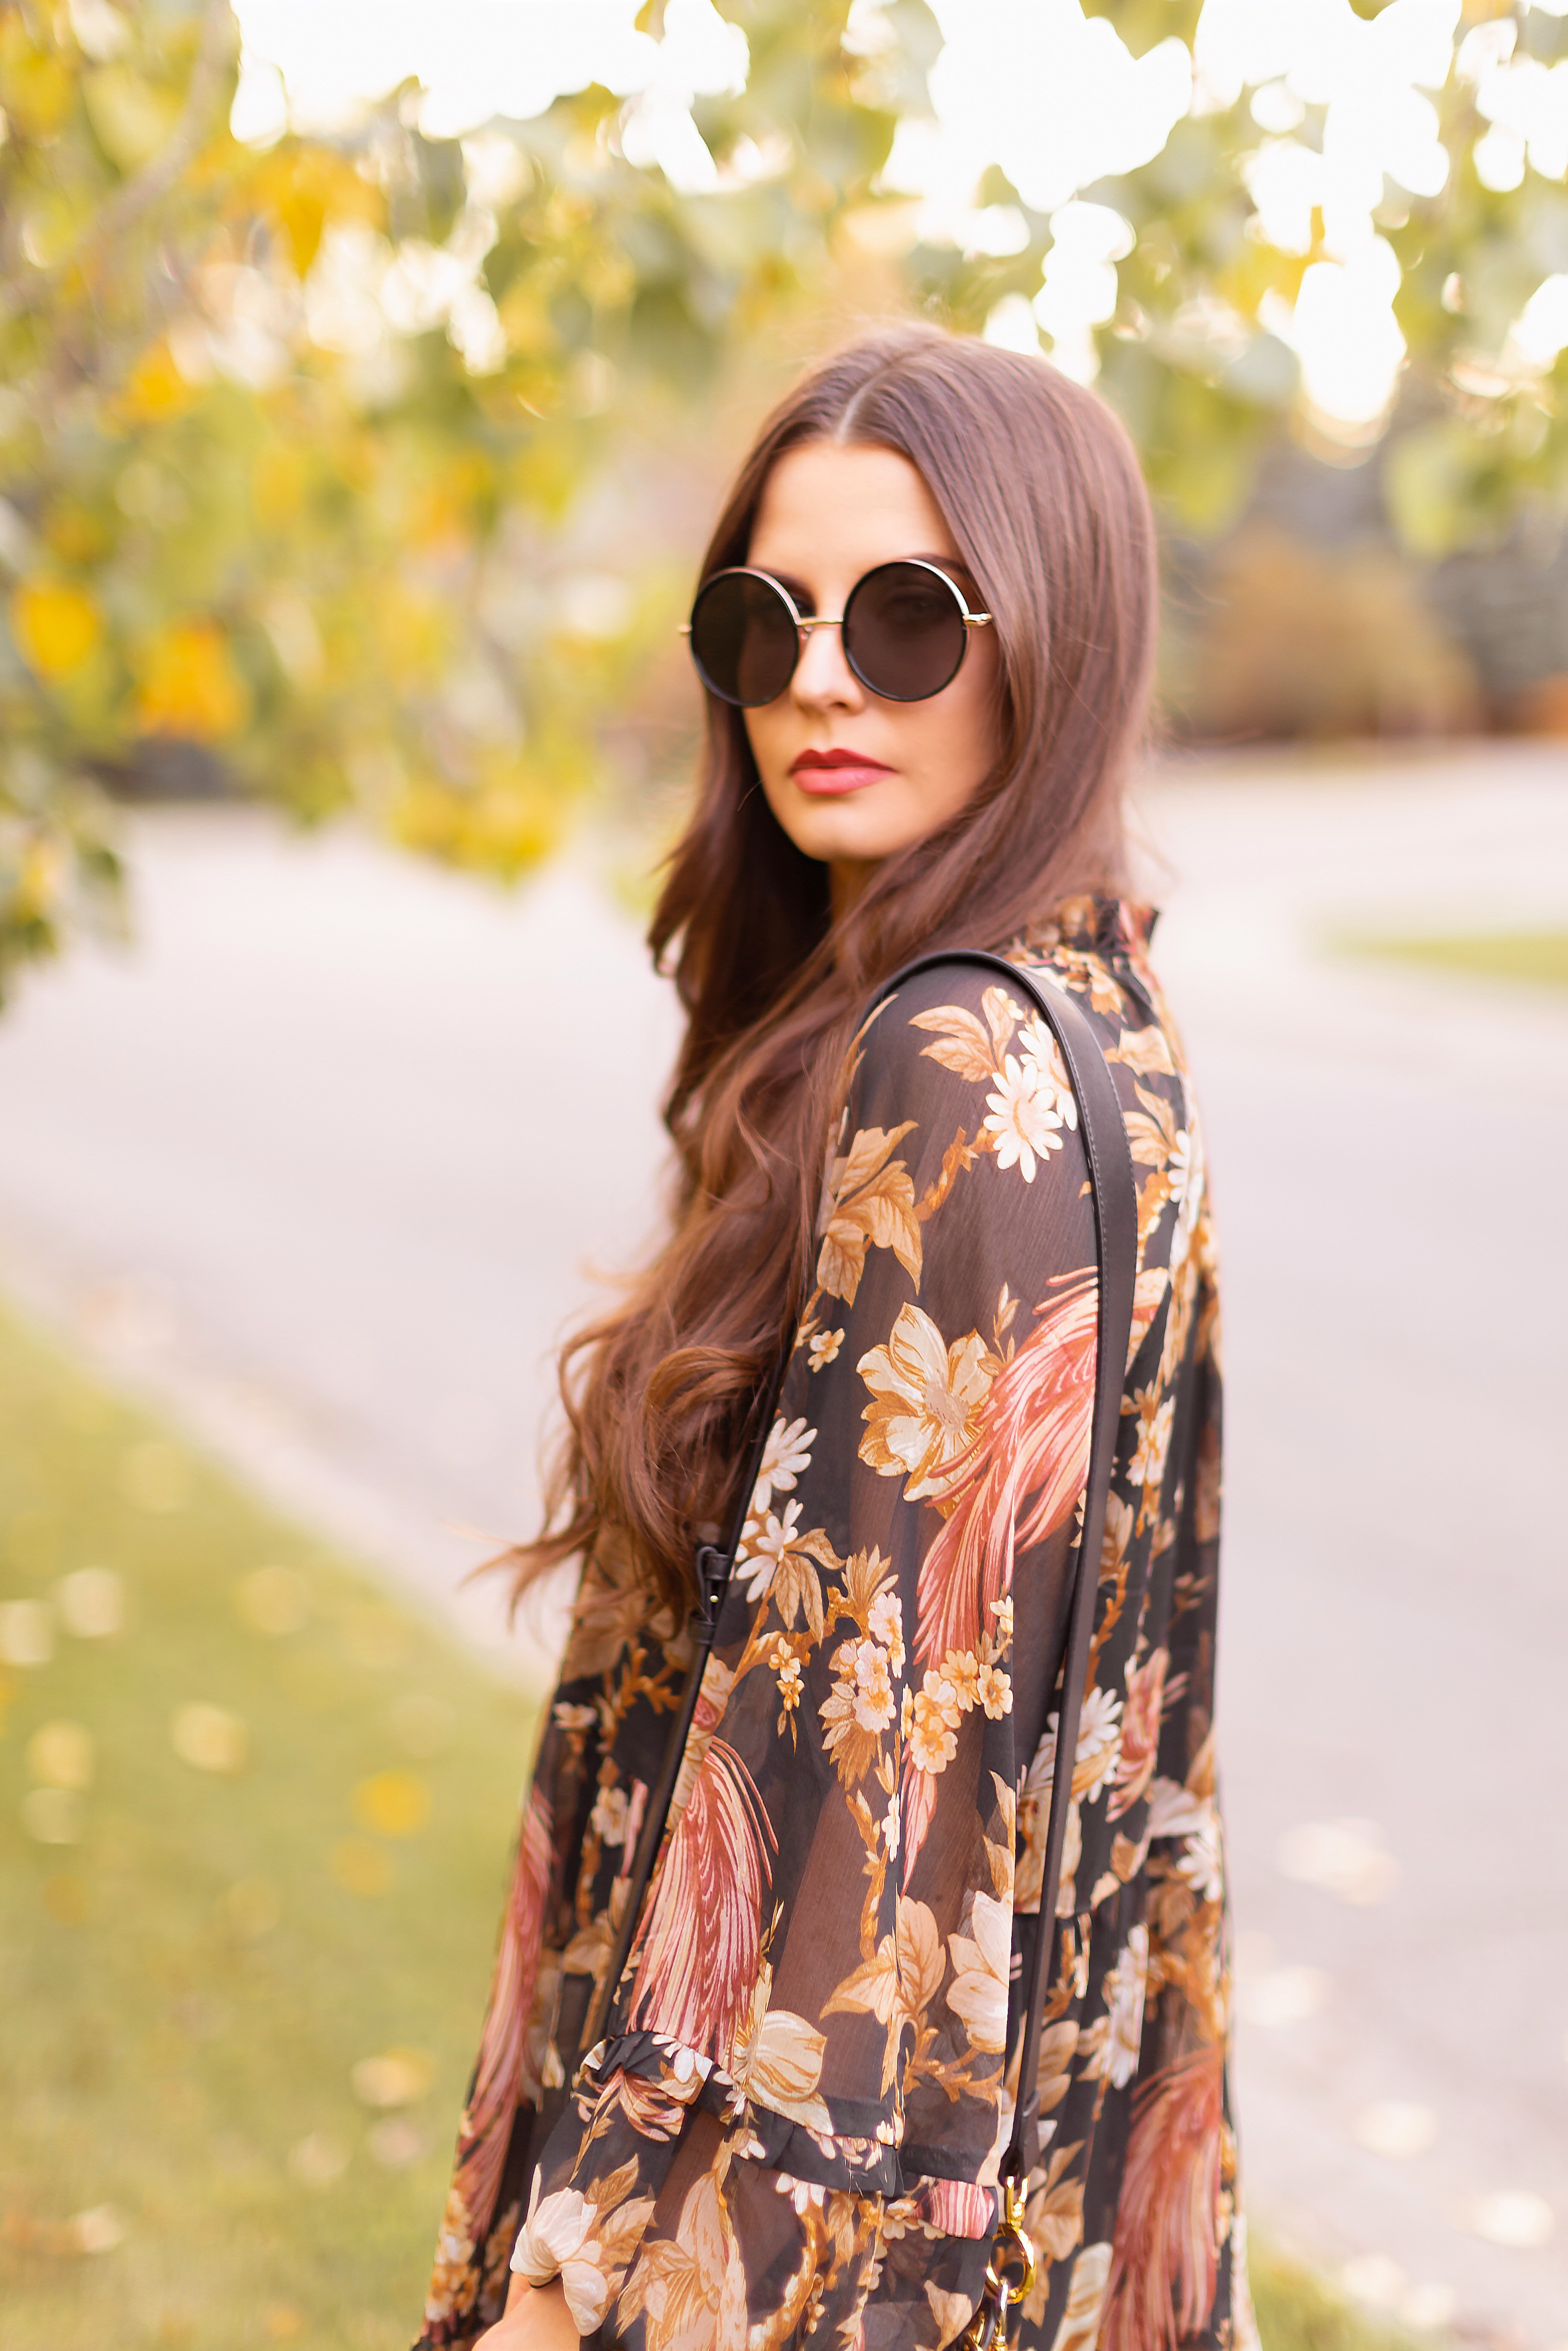 Summer to Fall 2019 Transitional Lookbook : Moody Florals | Top Summer to Fall 2019 Transitional Trends | Top Autumn 2019 Trends and How to Wear Them | The Best Moody Floral Dresses for Fall | | Brunette woman wearing an H&M Wide Cut Chiffon Floral Dress, Zara Taupe Mid-Calf Suede Boots, A Black Chloe Tess Dupe by Artisan Anything, Round Black Sunglasses and a Dark Red Lip | Top Calgary Fashion & Creative Lifestyle Blogger // JustineCelina.com